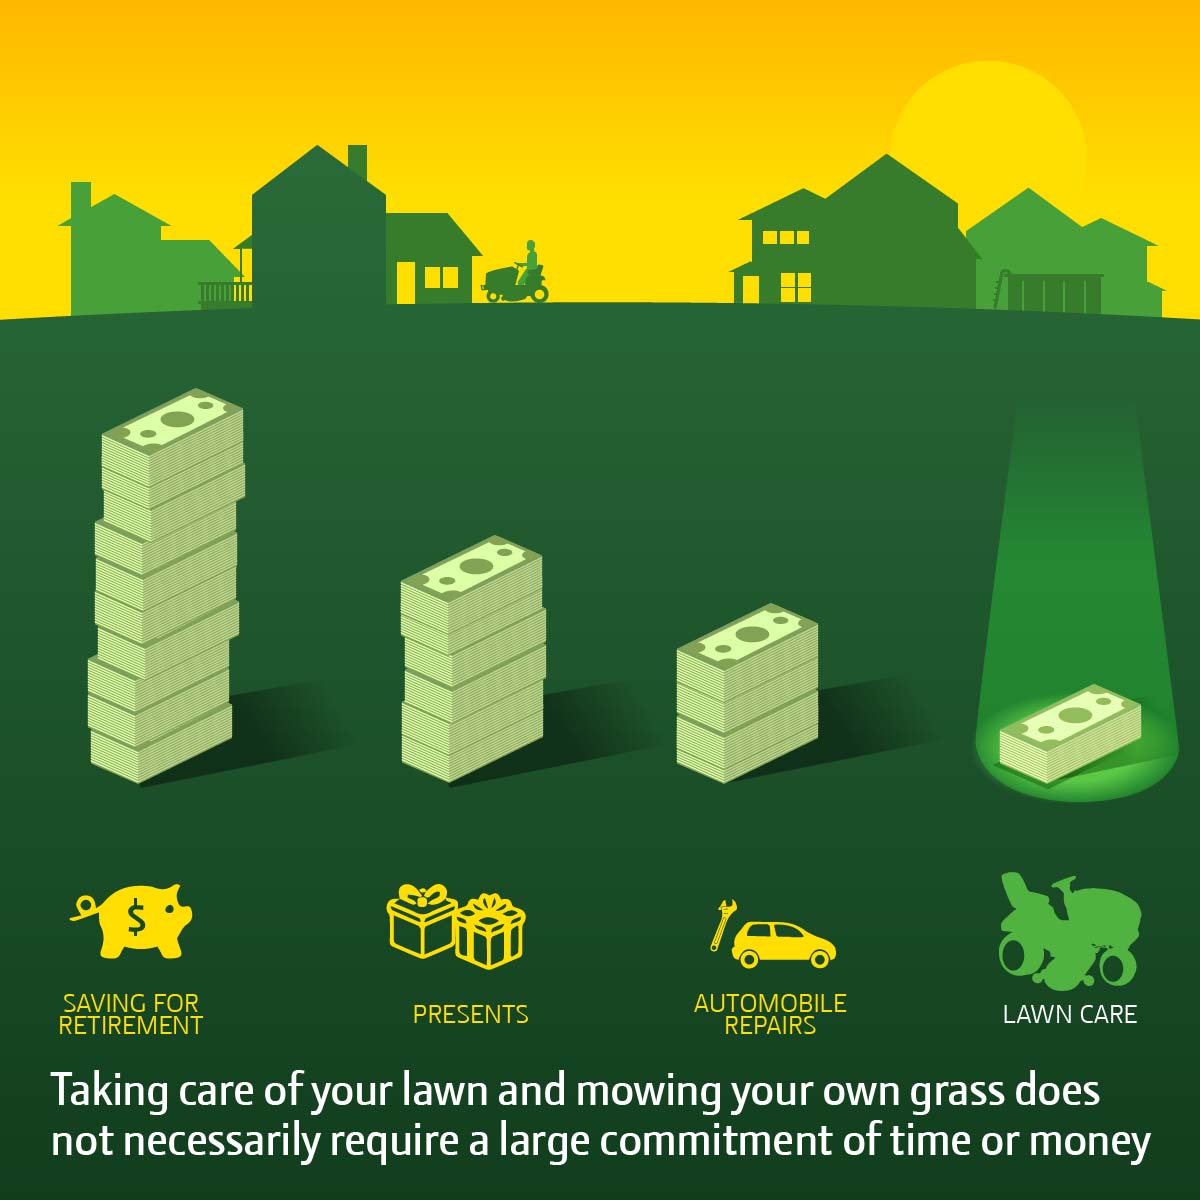 Research from John Deere shows that consumers spend considerably less, annually, on lawn care than other common expenses.